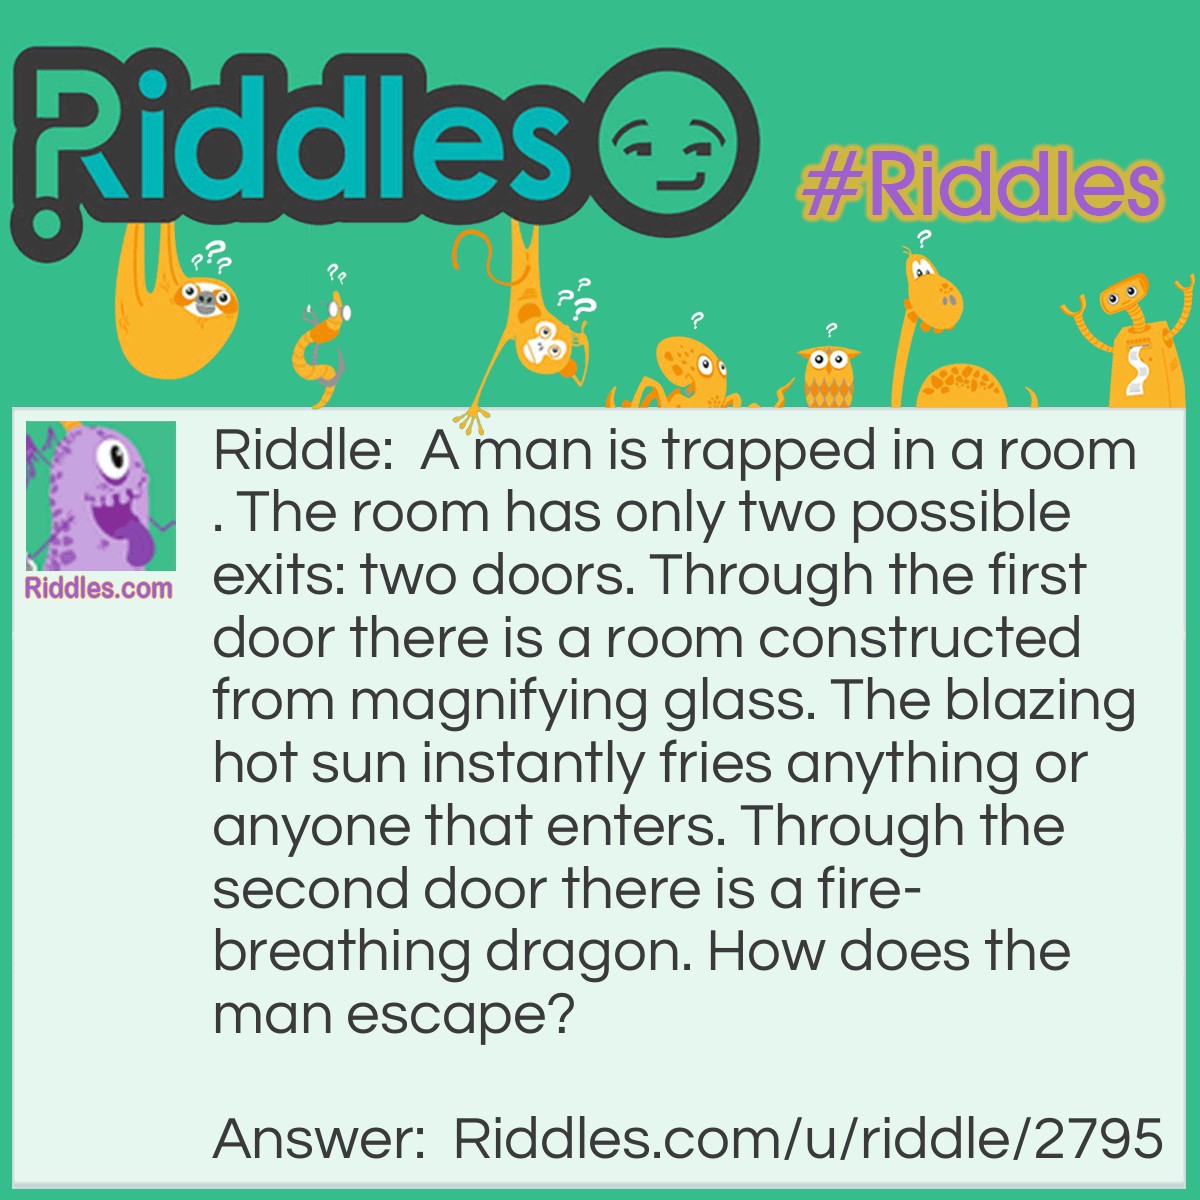 Riddle: A man is trapped in a room. The room has only two possible exits: two doors. Through the first door there is a room constructed from magnifying glass. The blazing hot sun instantly fries anything or anyone that enters. Through the second door there is a fire-breathing dragon. How does the man escape? Answer: He waits until night time and then goes through the first door.